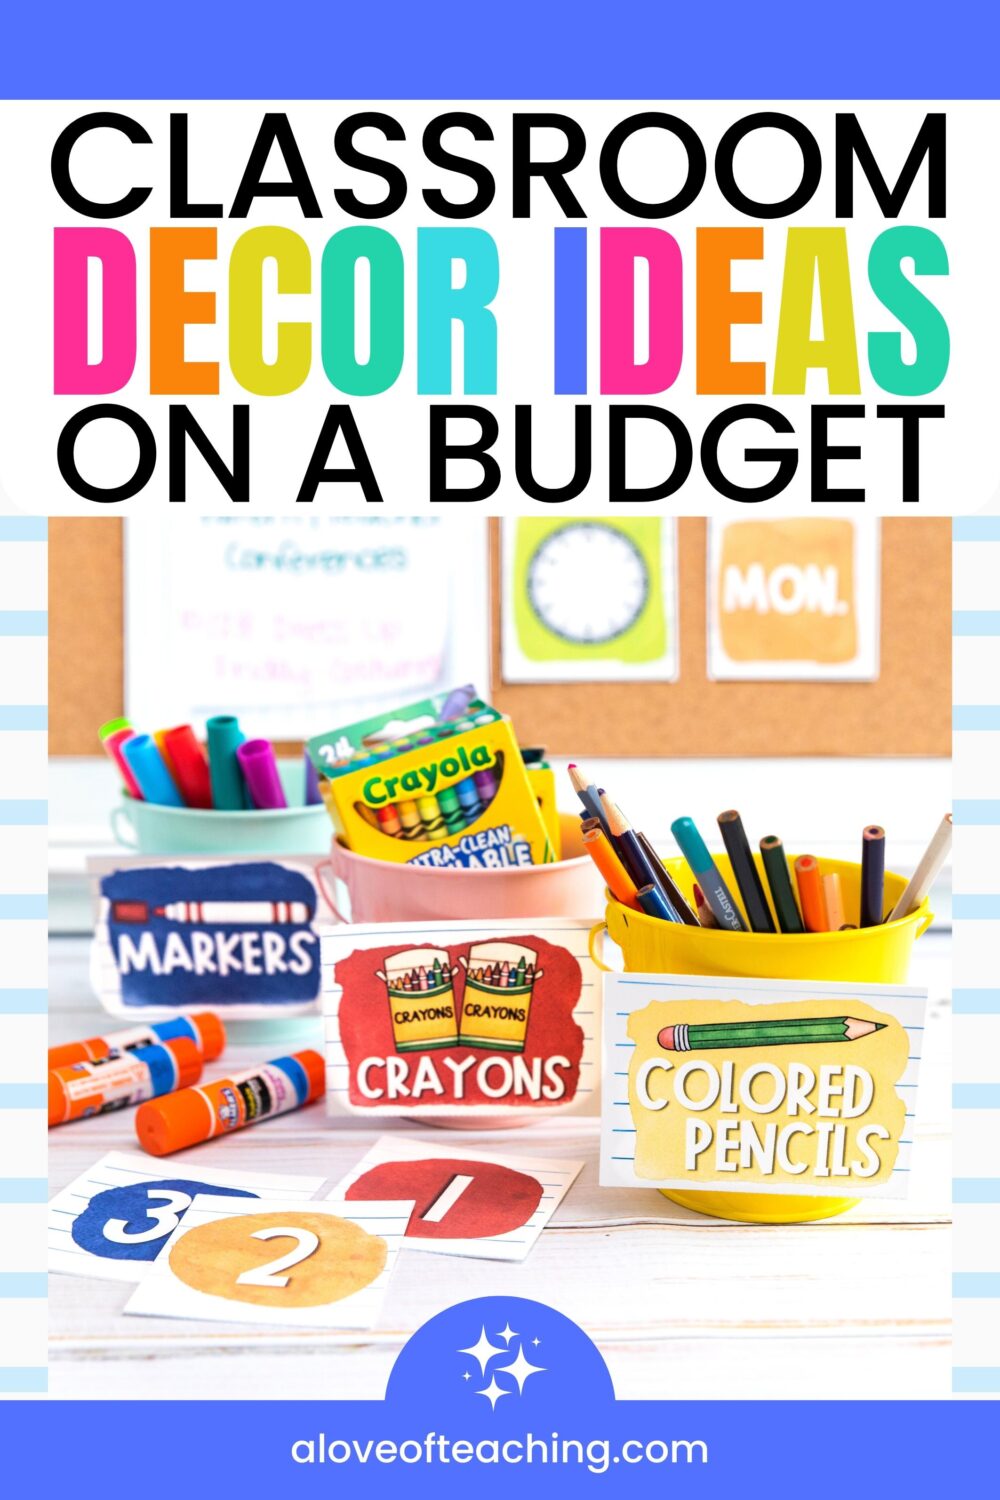 Classroom Decor Ideas on a Budget: Cheap Ways to Decorate Your Classroom